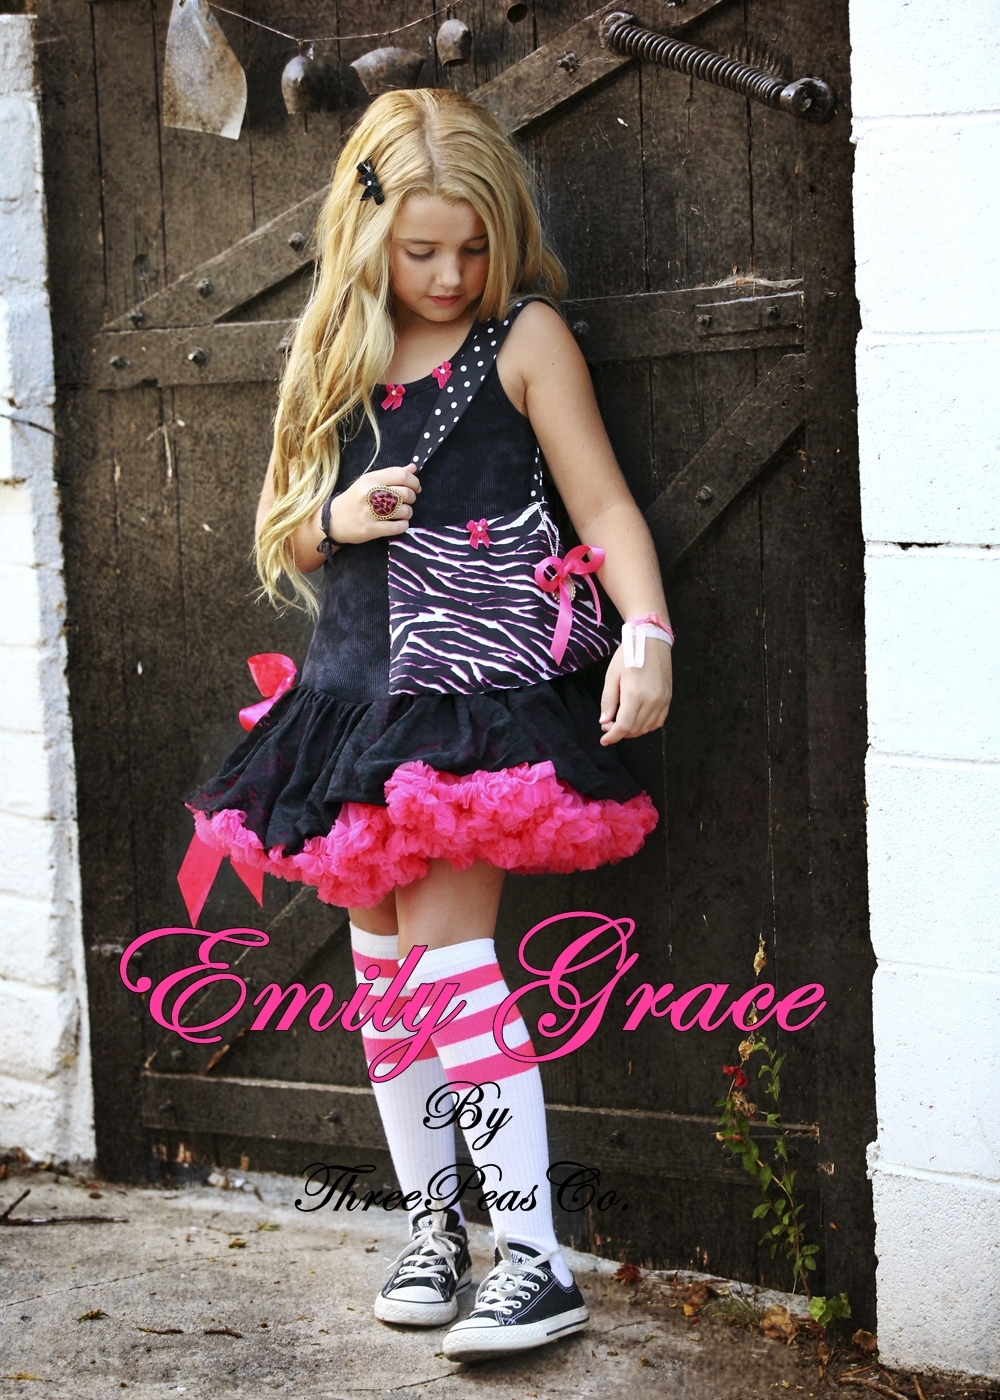 Emily Grace Reaves Images on Fanpop.